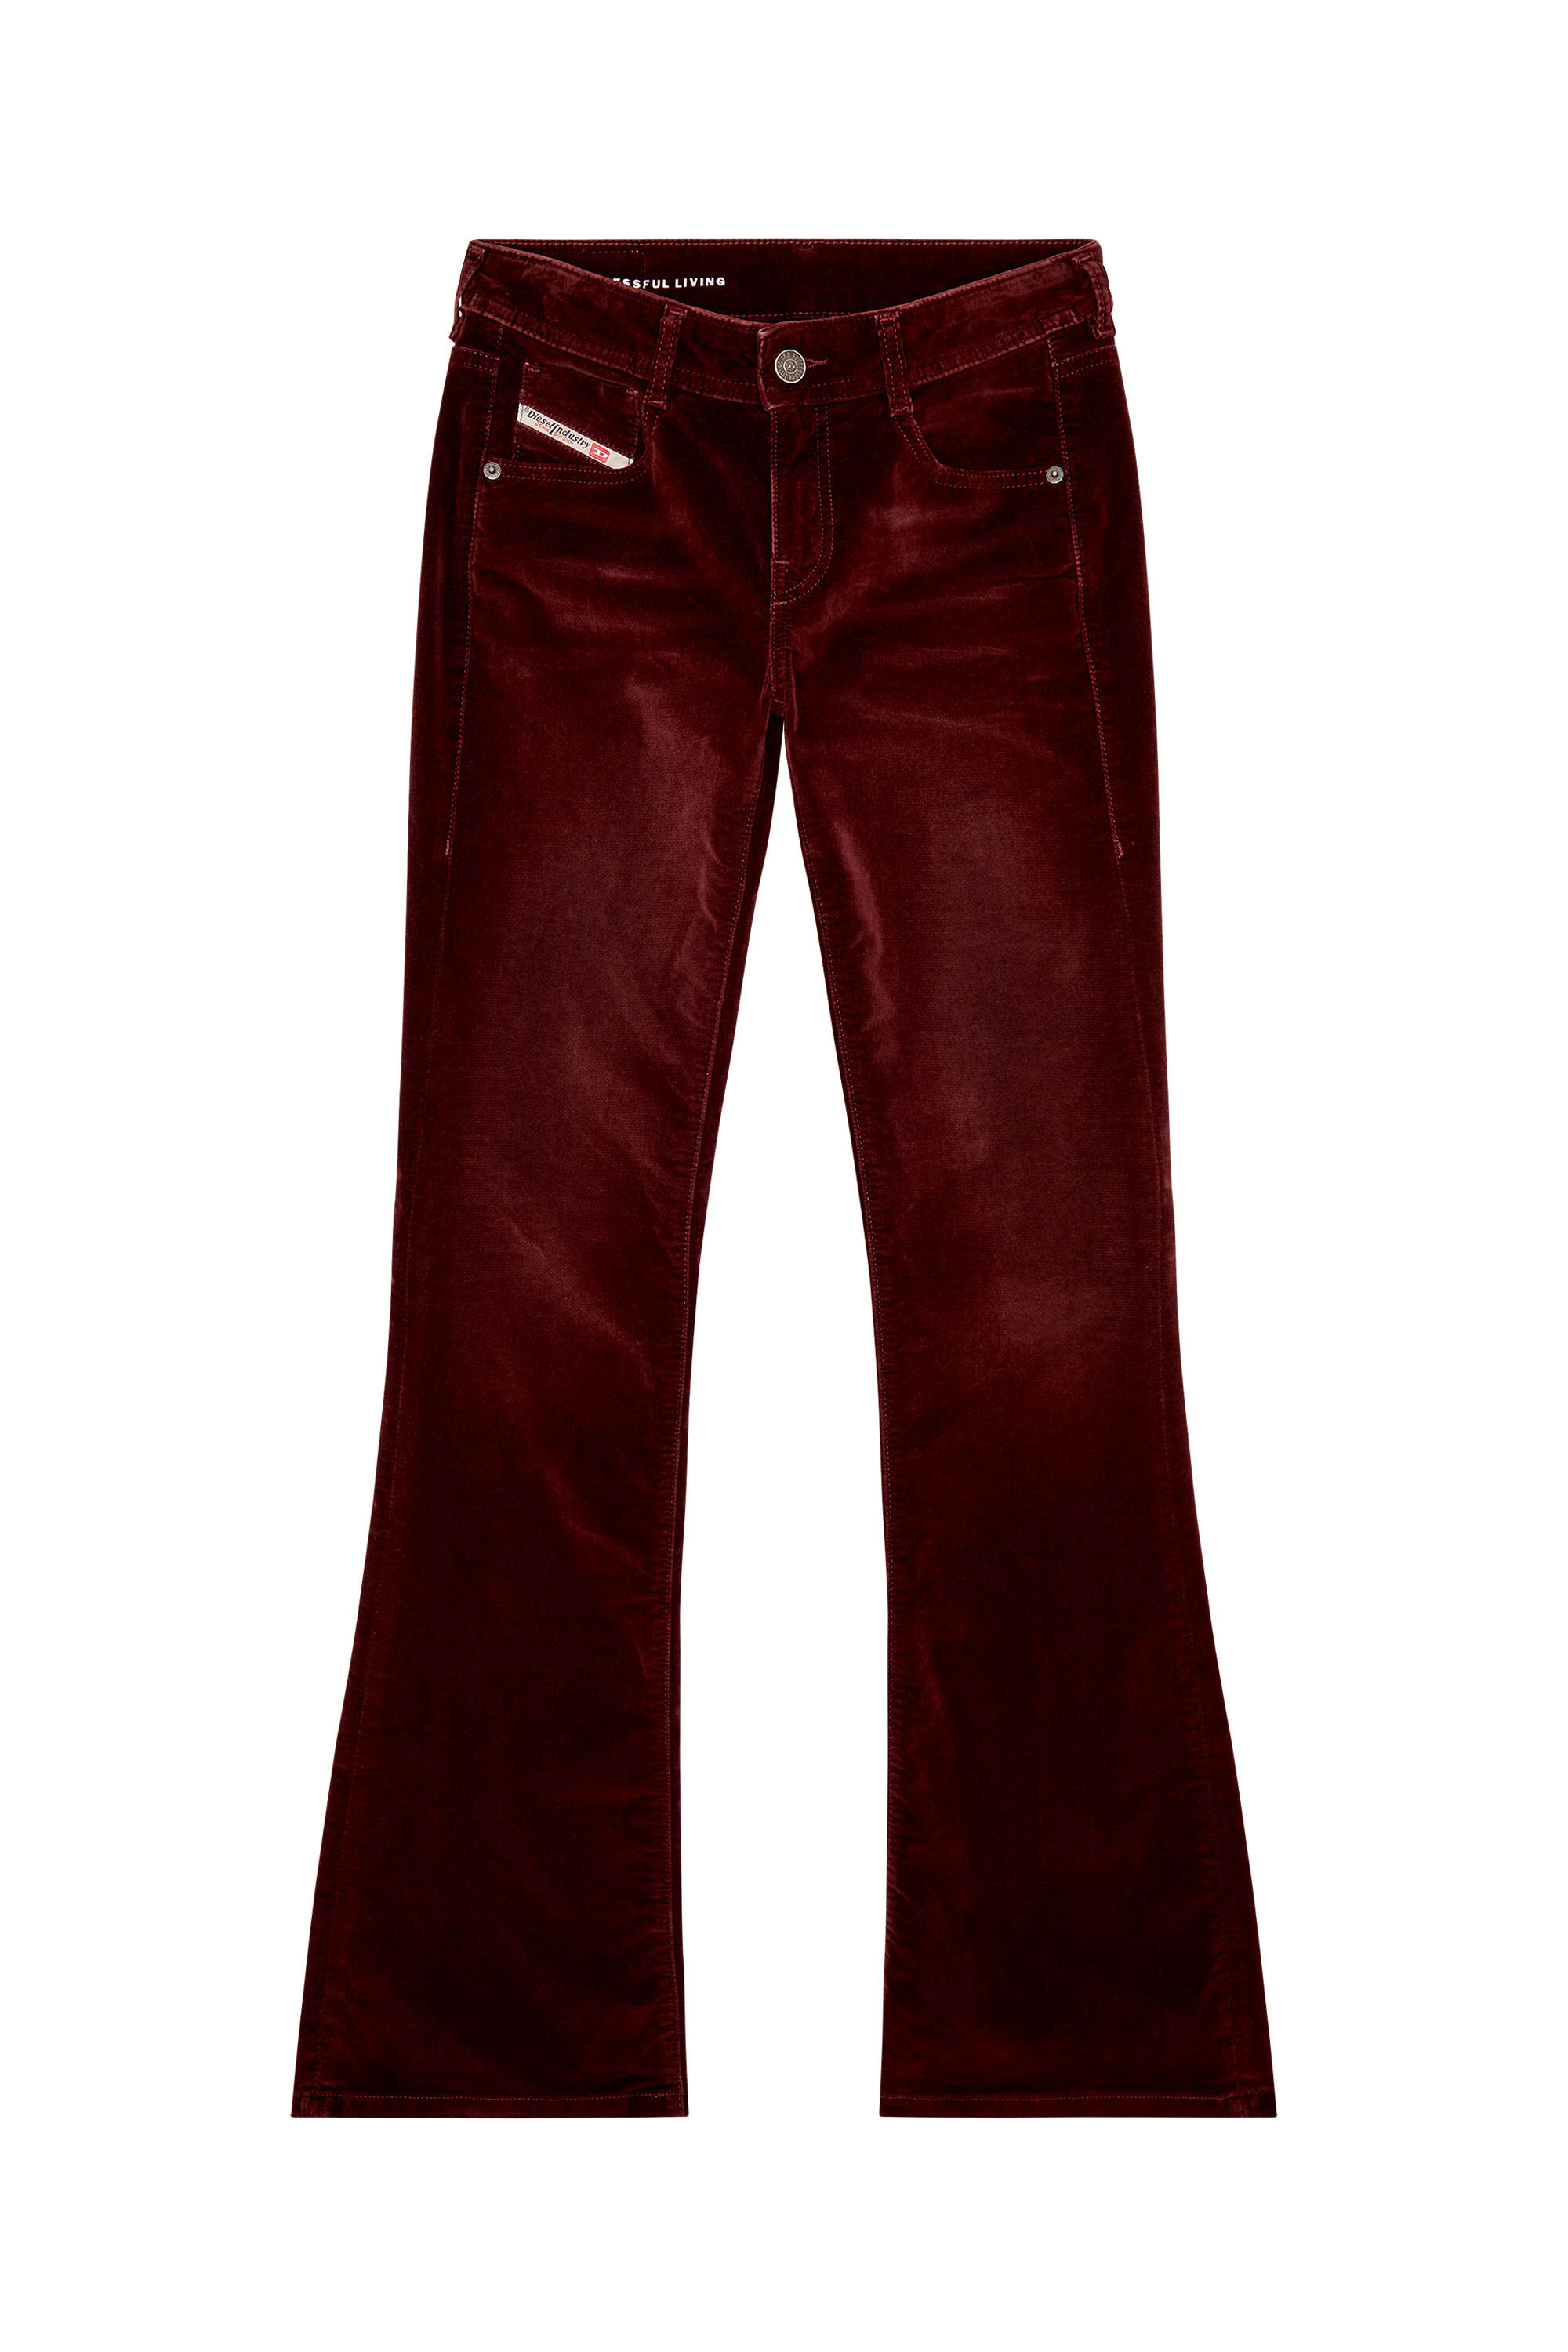 Diesel - Bootcut and Flare Jeans 1969 D-Ebbey 003HL, Mujer Bootcut y Flare Jeans - 1969 D-Ebbey in Rojo - Image 2